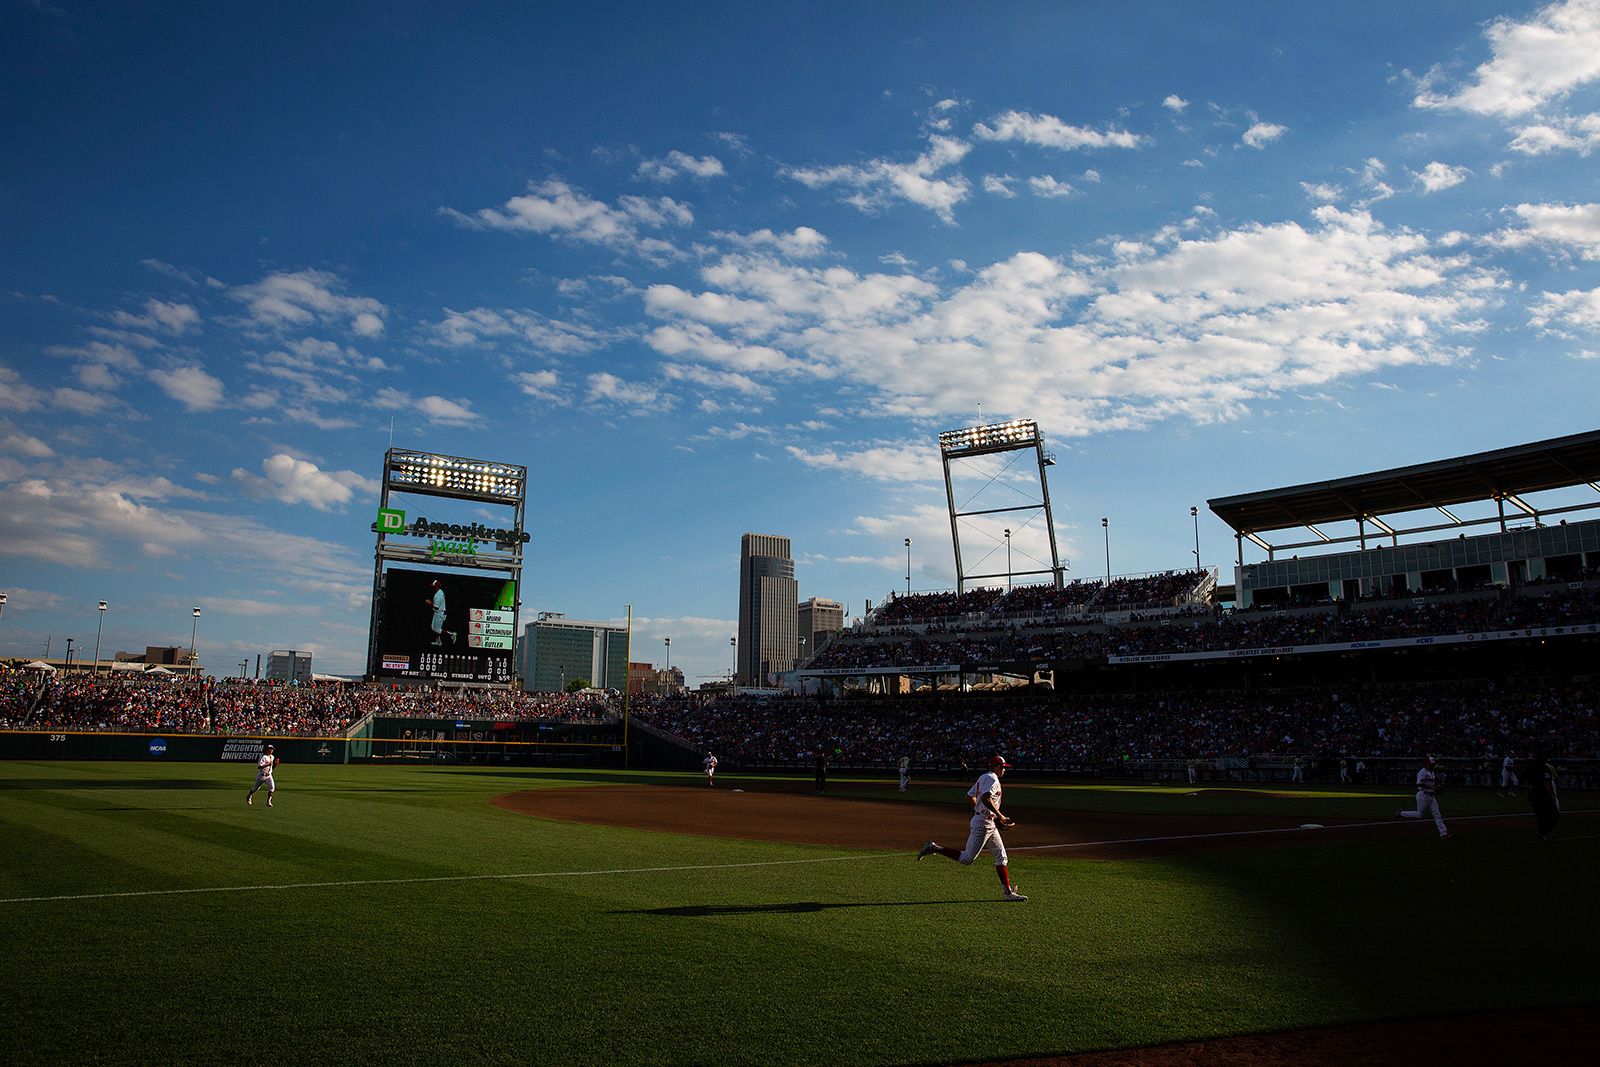 College World Series 2016: Bracket and schedule for Omaha set 